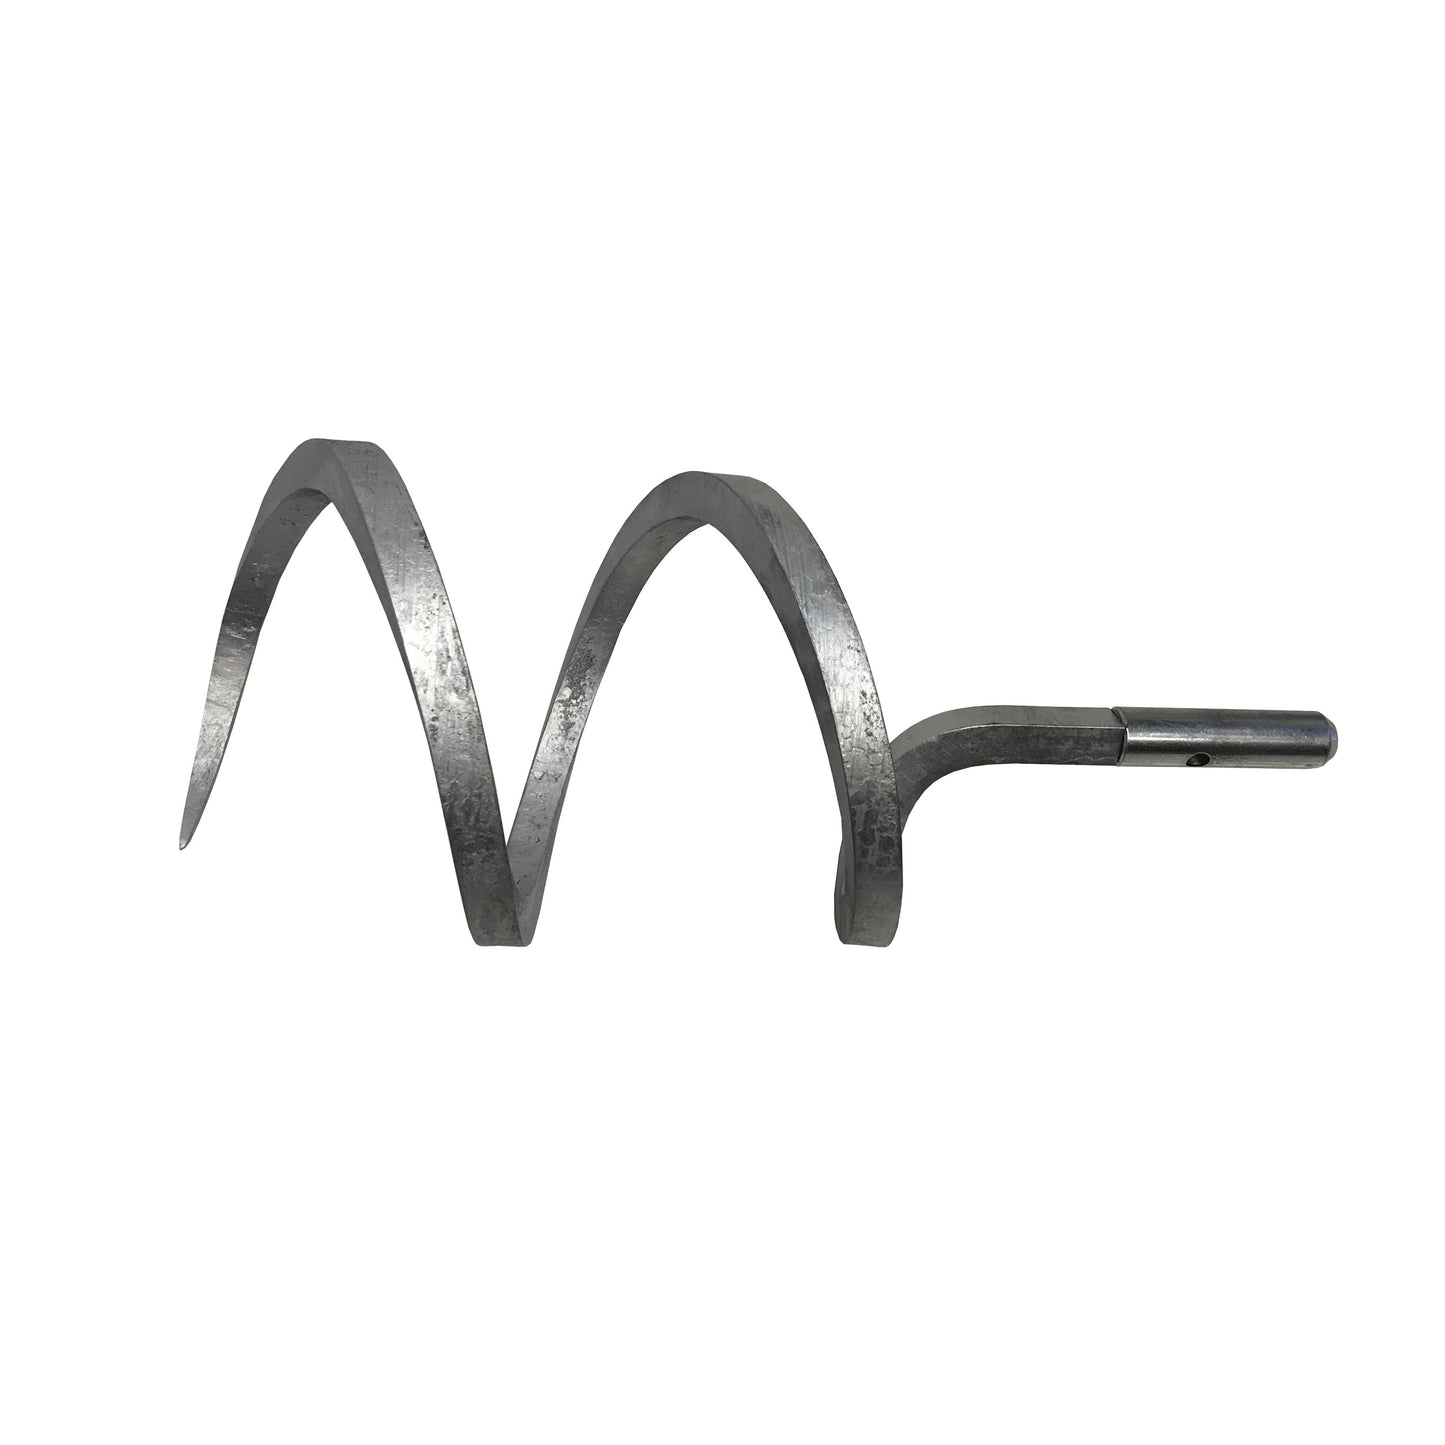 Square Bar Corkscrew with Direct Hook End